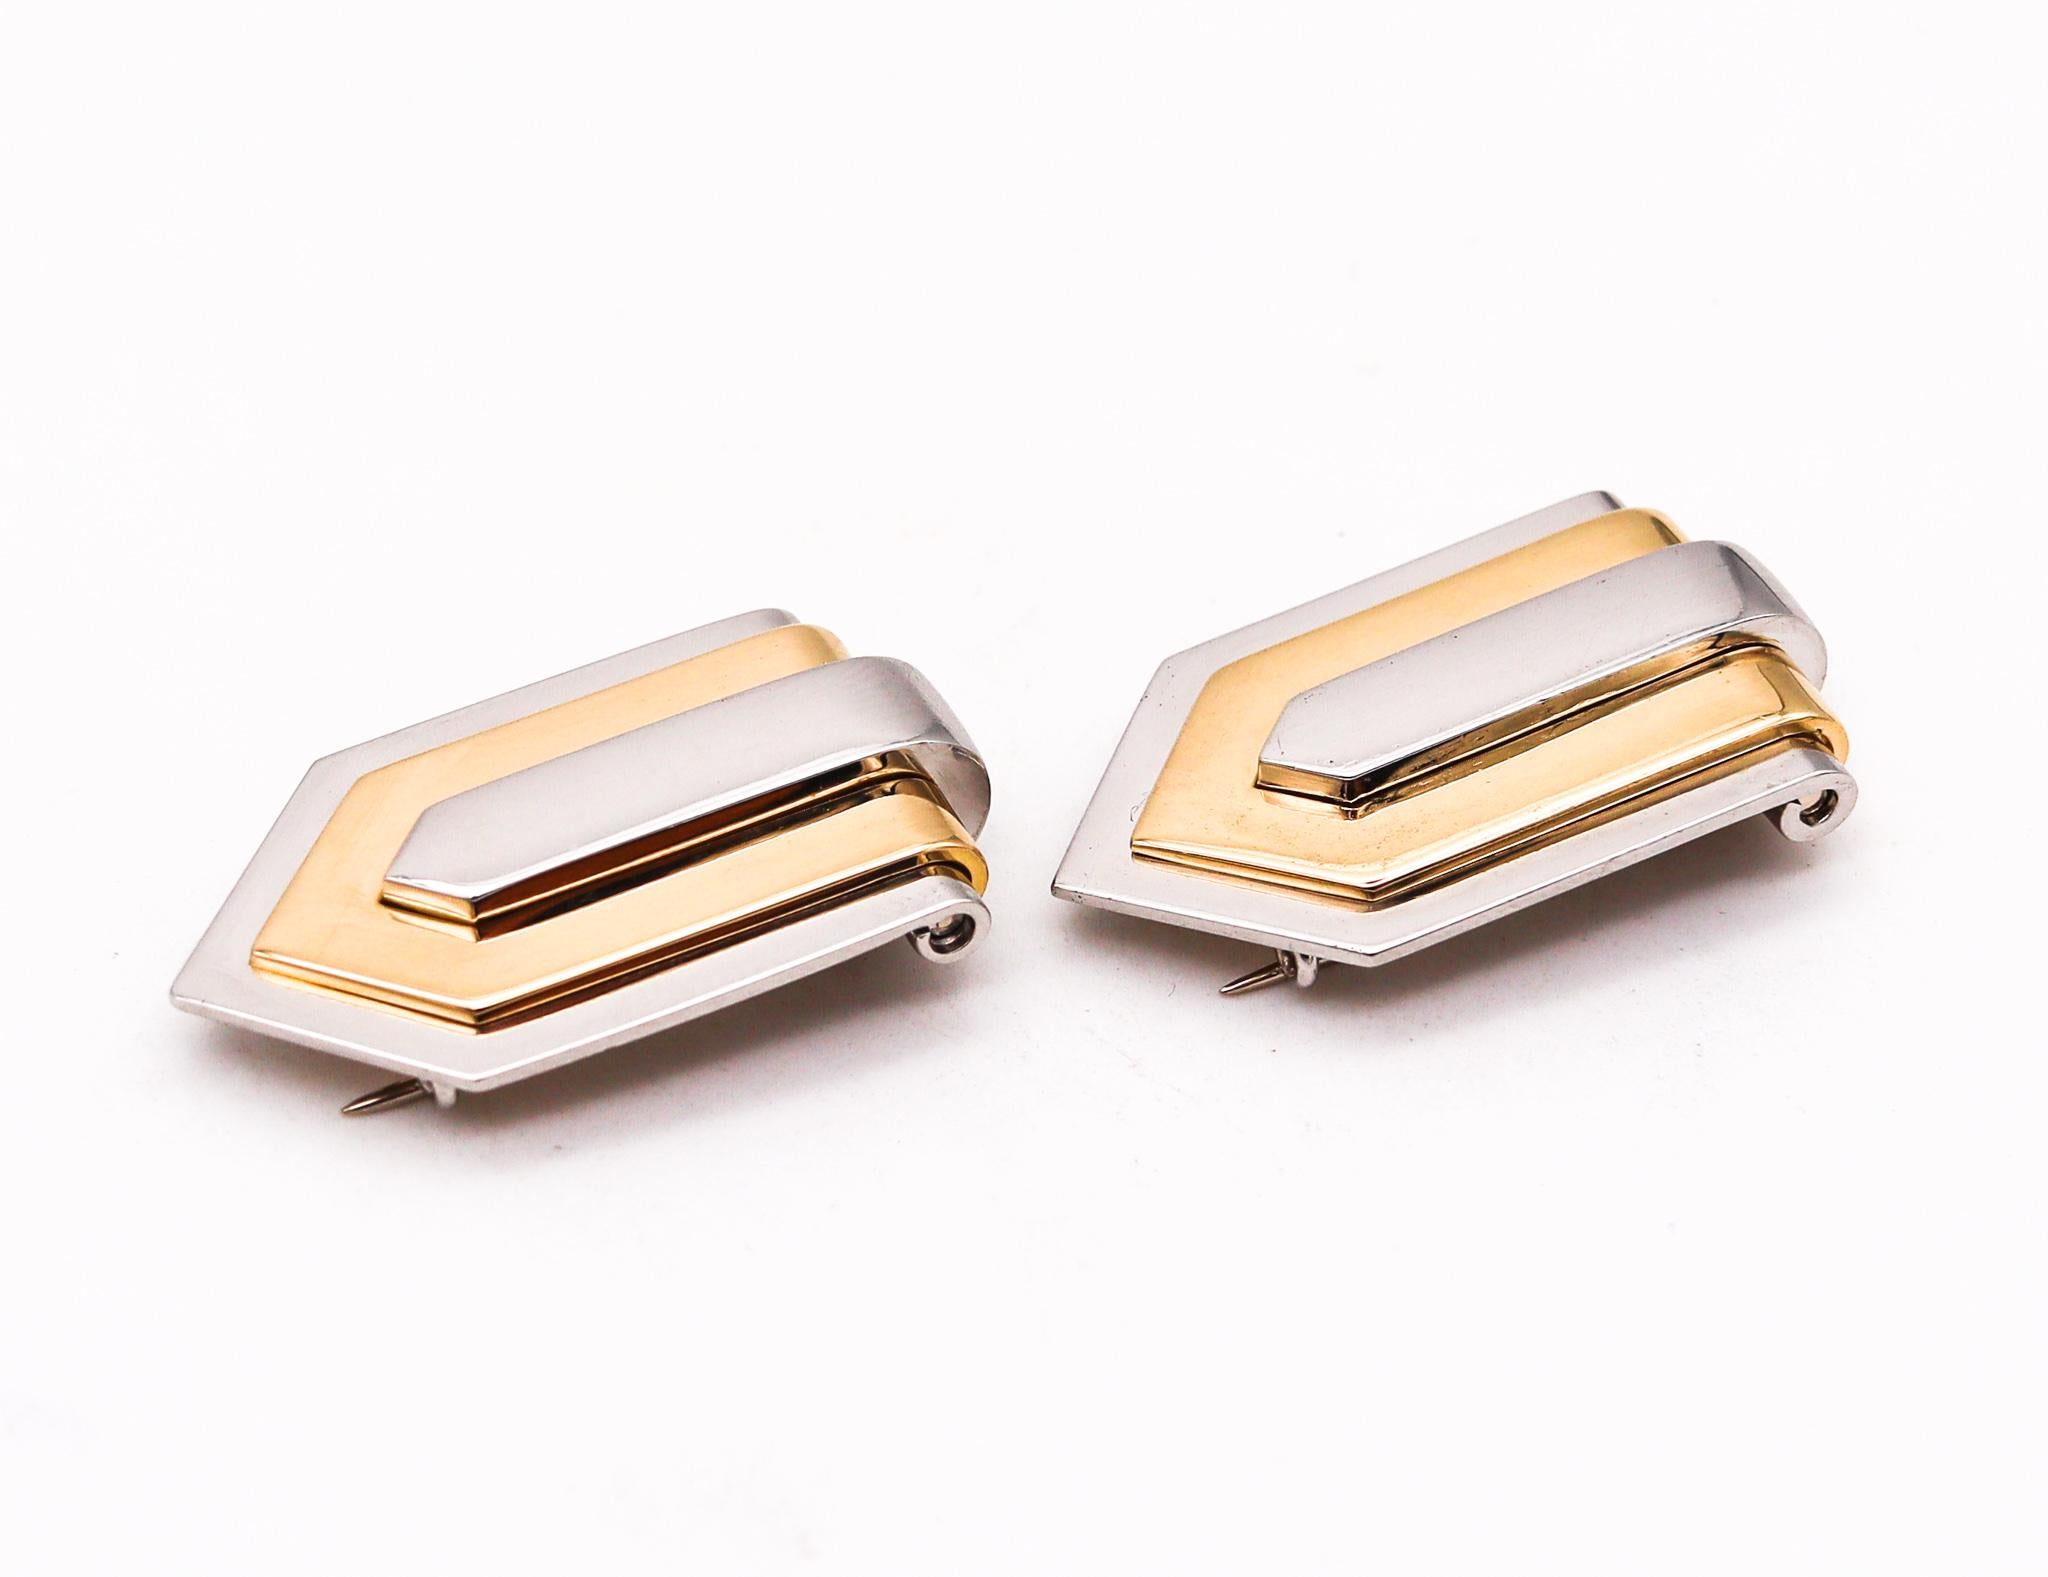 Hemmerle Munich 1970 Geometric Pair of Dress Clips in 18Kt Gold and Platinum In Excellent Condition For Sale In Miami, FL